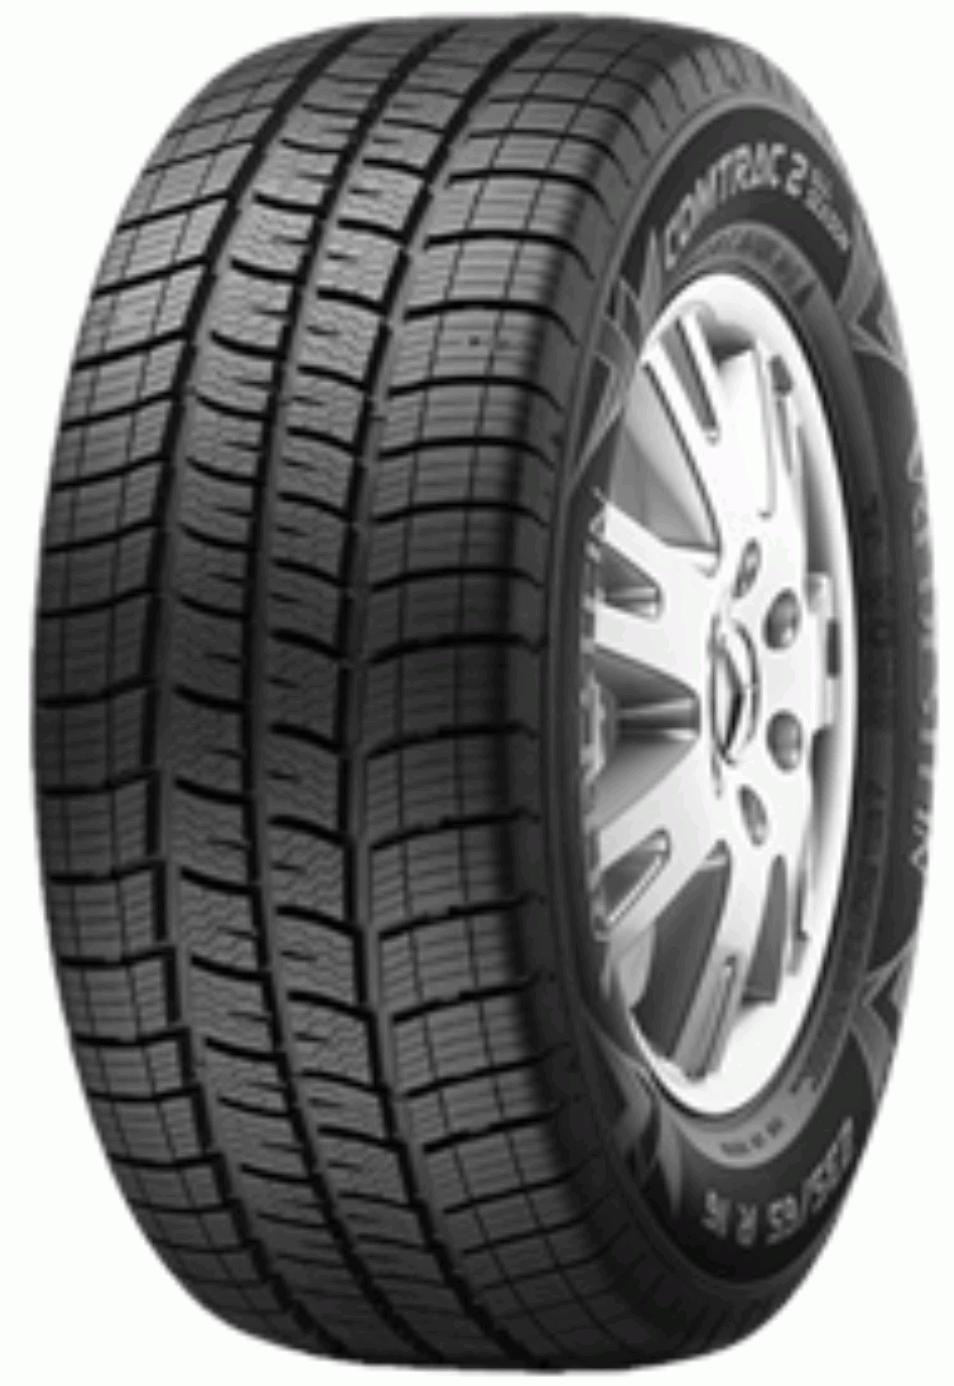 - Tyre Season All Comtrac Tests 2 and Vredestein Reviews